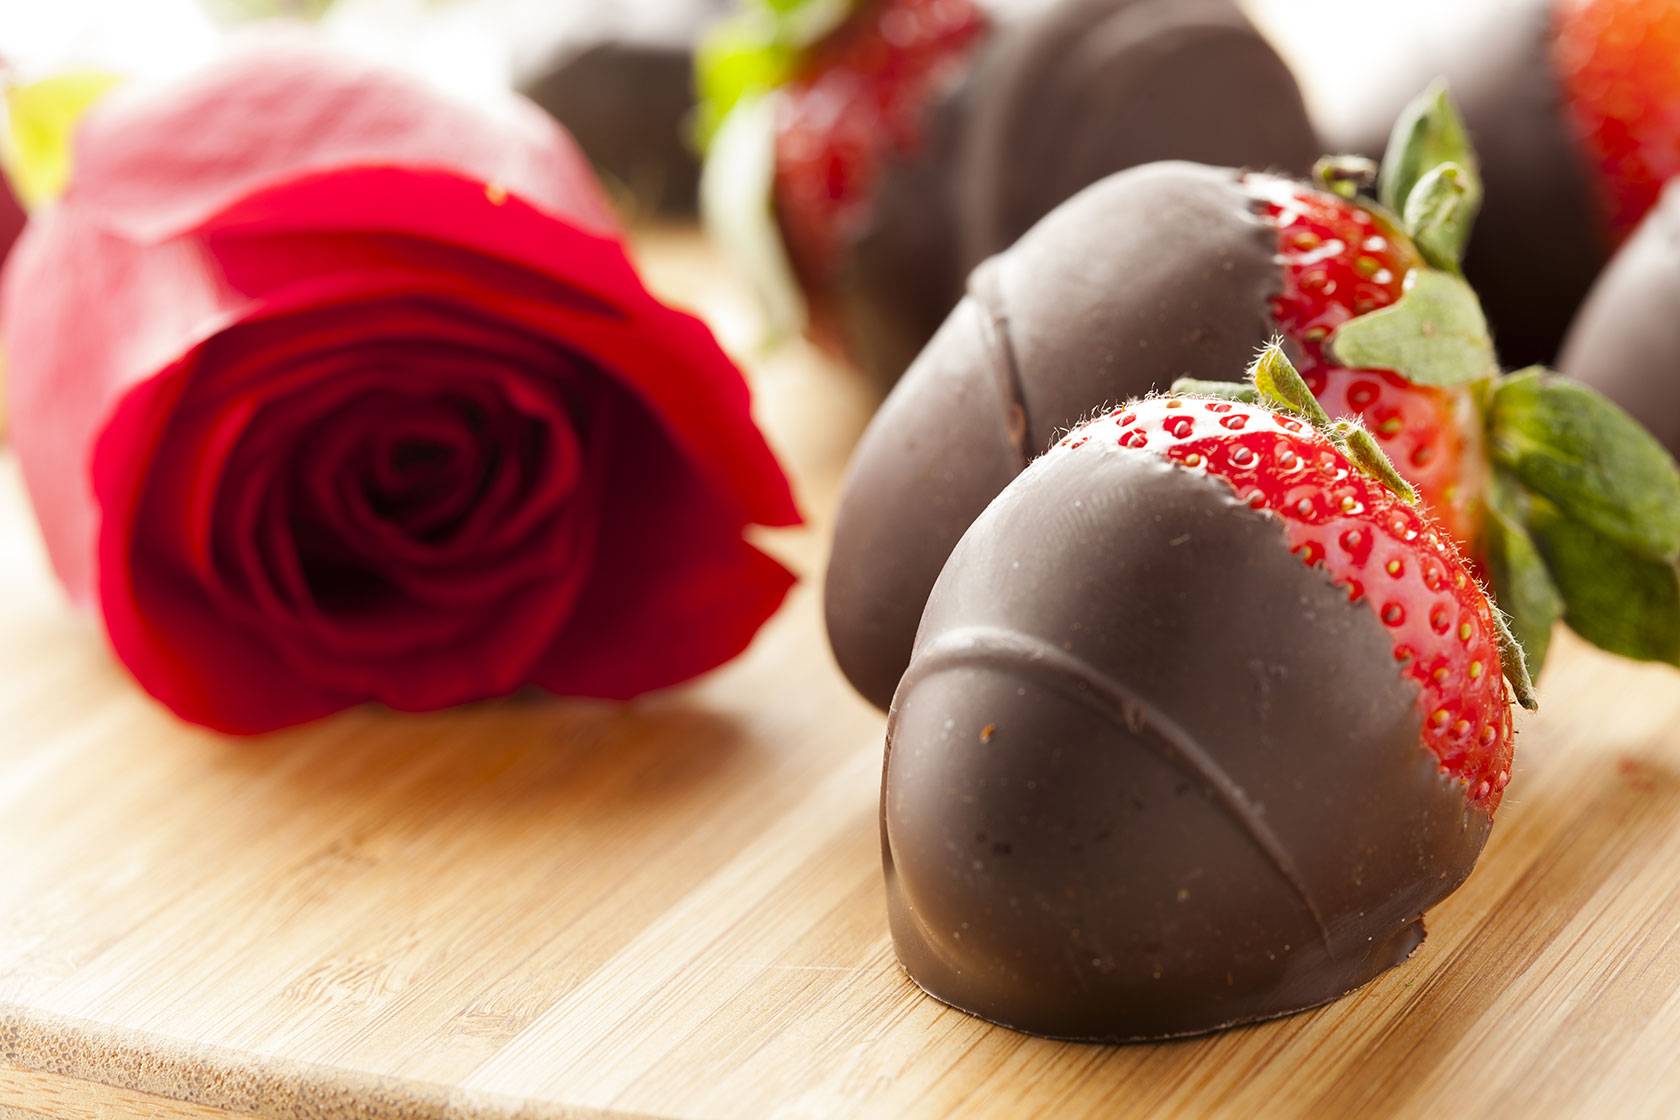 Strawberries Dipped In Chocolate